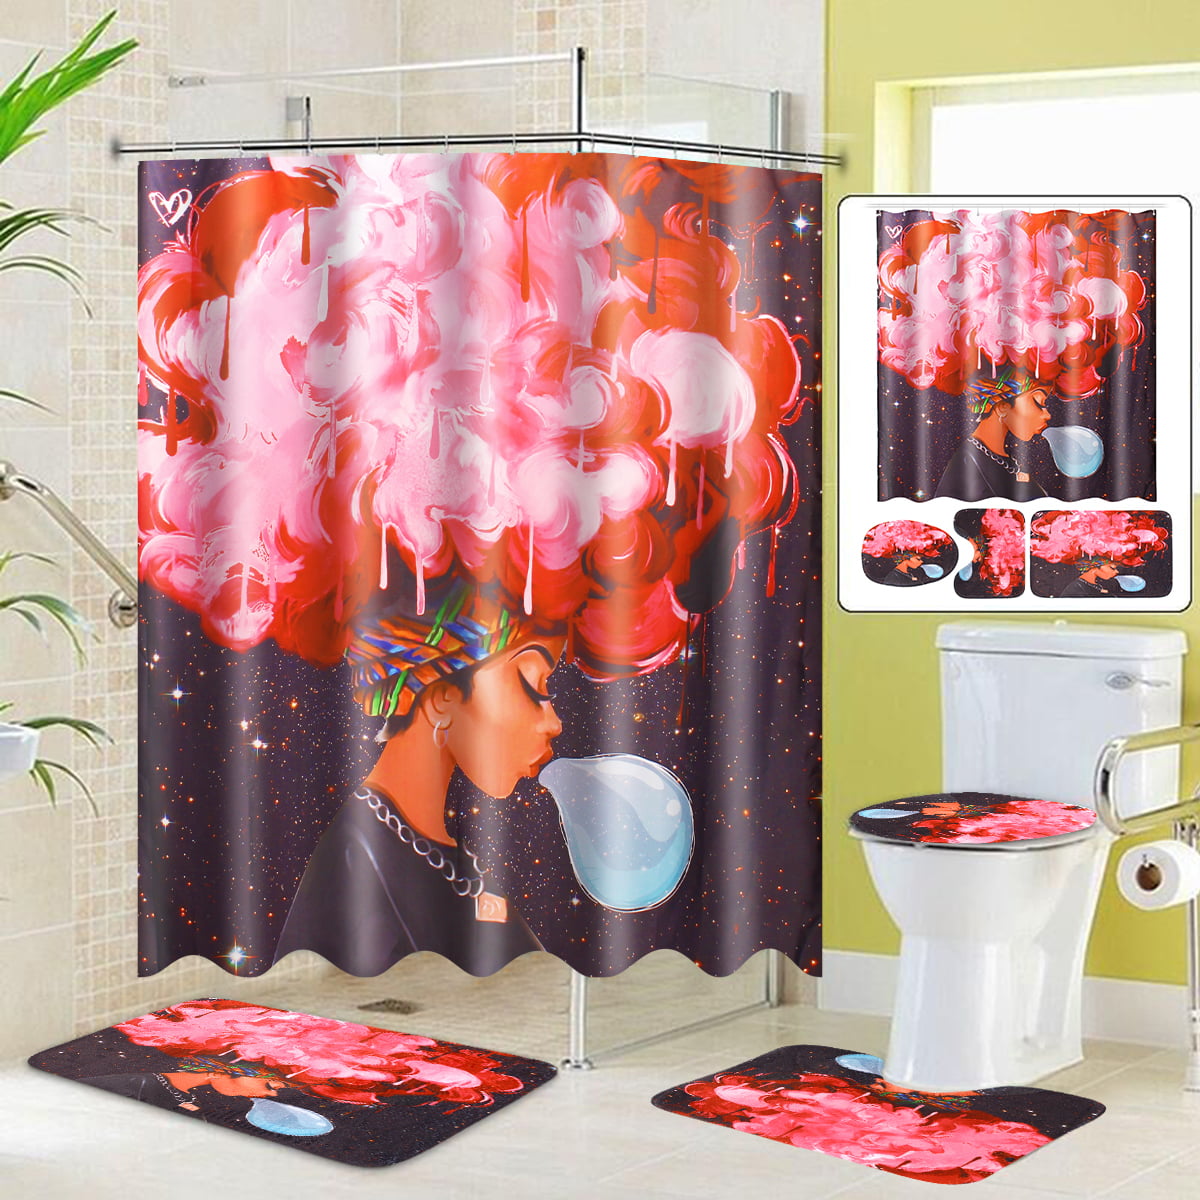 African Women Shower Curtain with 12 Hooks Bath Mat Toilet Cover Rug Decor Set 